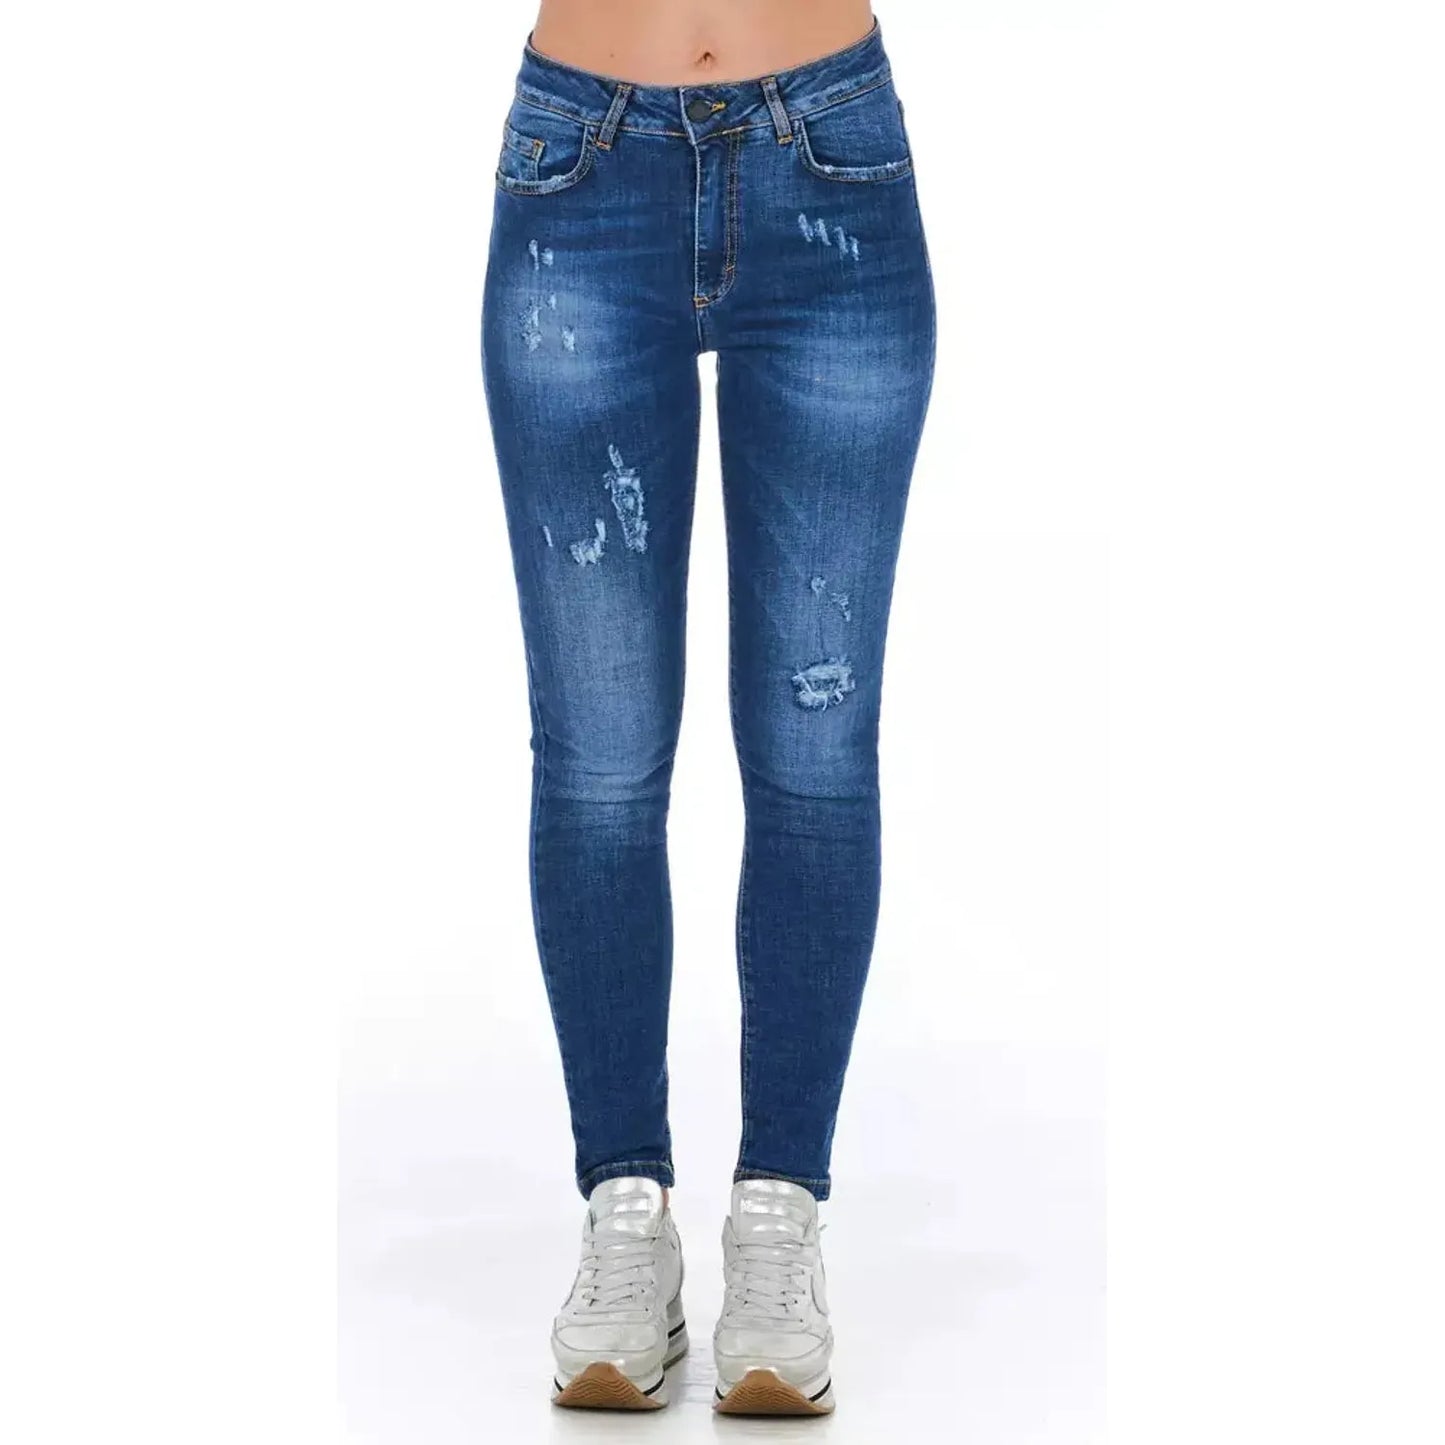 Frankie Morello Chic Worn Wash Denim Jeans for Sophisticated Style blue-jeans-pant-5 product-21771-951625858-23-8f2d03e3-14c.webp